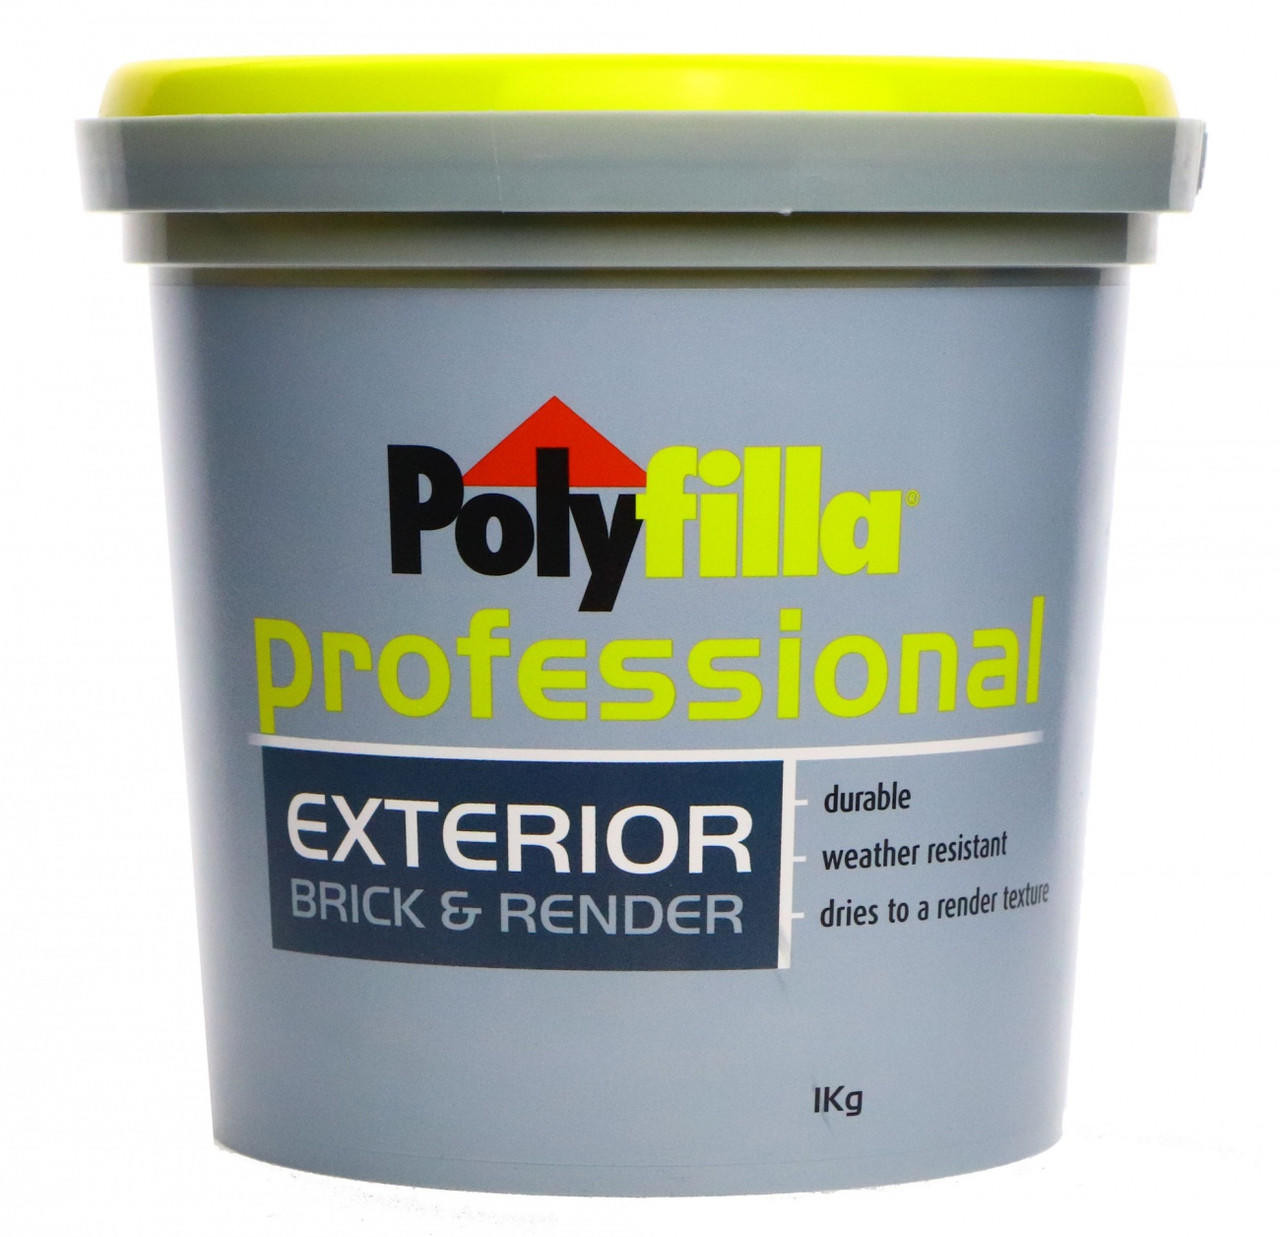 Polyfilla ext and render 1kg